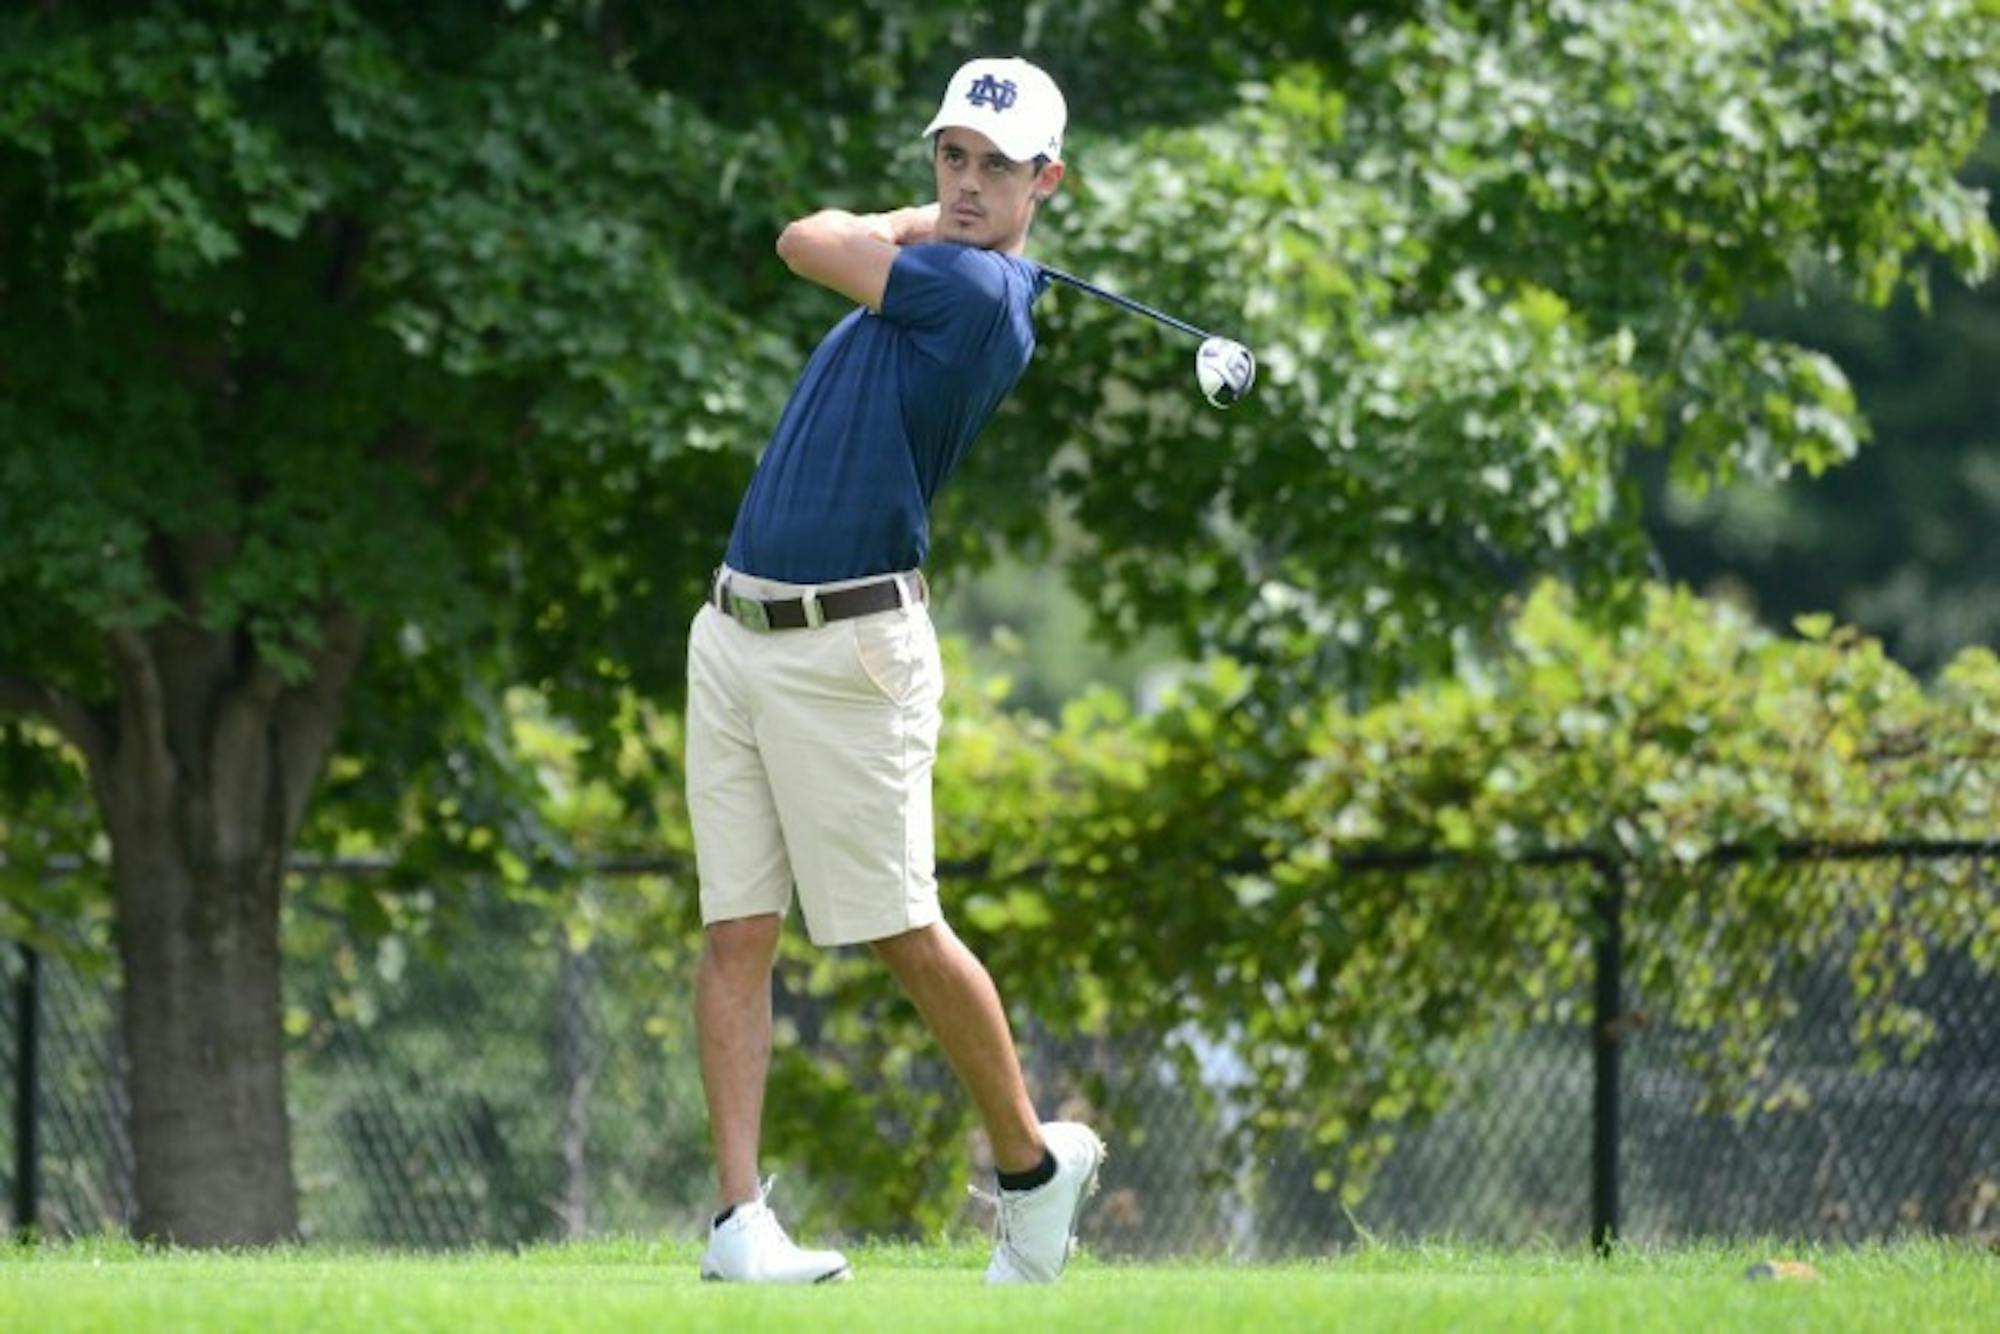 Junior Zach Toste tees off during the Notre Dame Kickoff Challenge on Aug. 31 at Warren Golf Course.